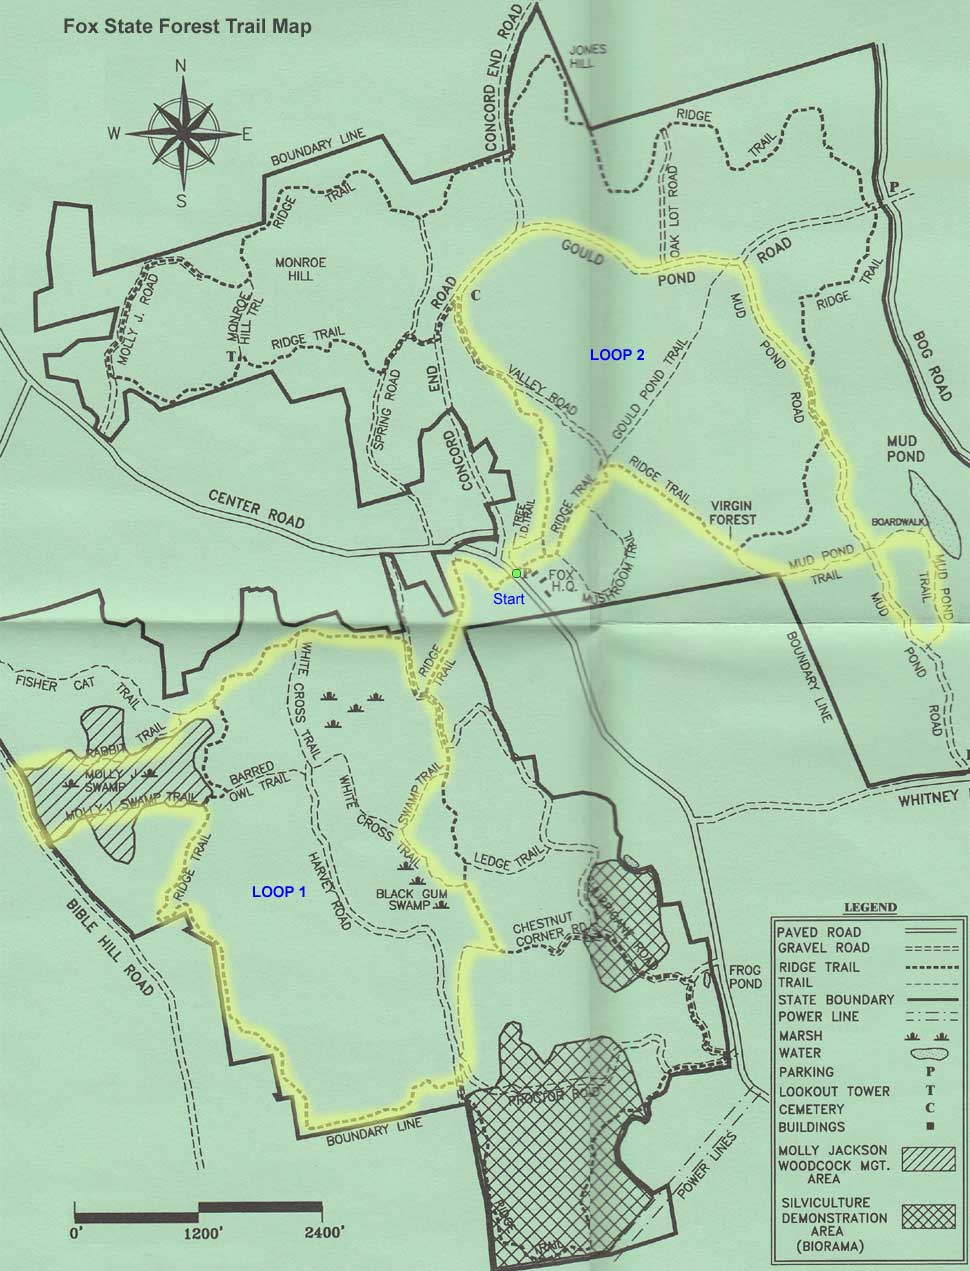 Trail map of hike route at Fox State Forest (map courtesy of State of New Hampshire Division of Forests and Lands)